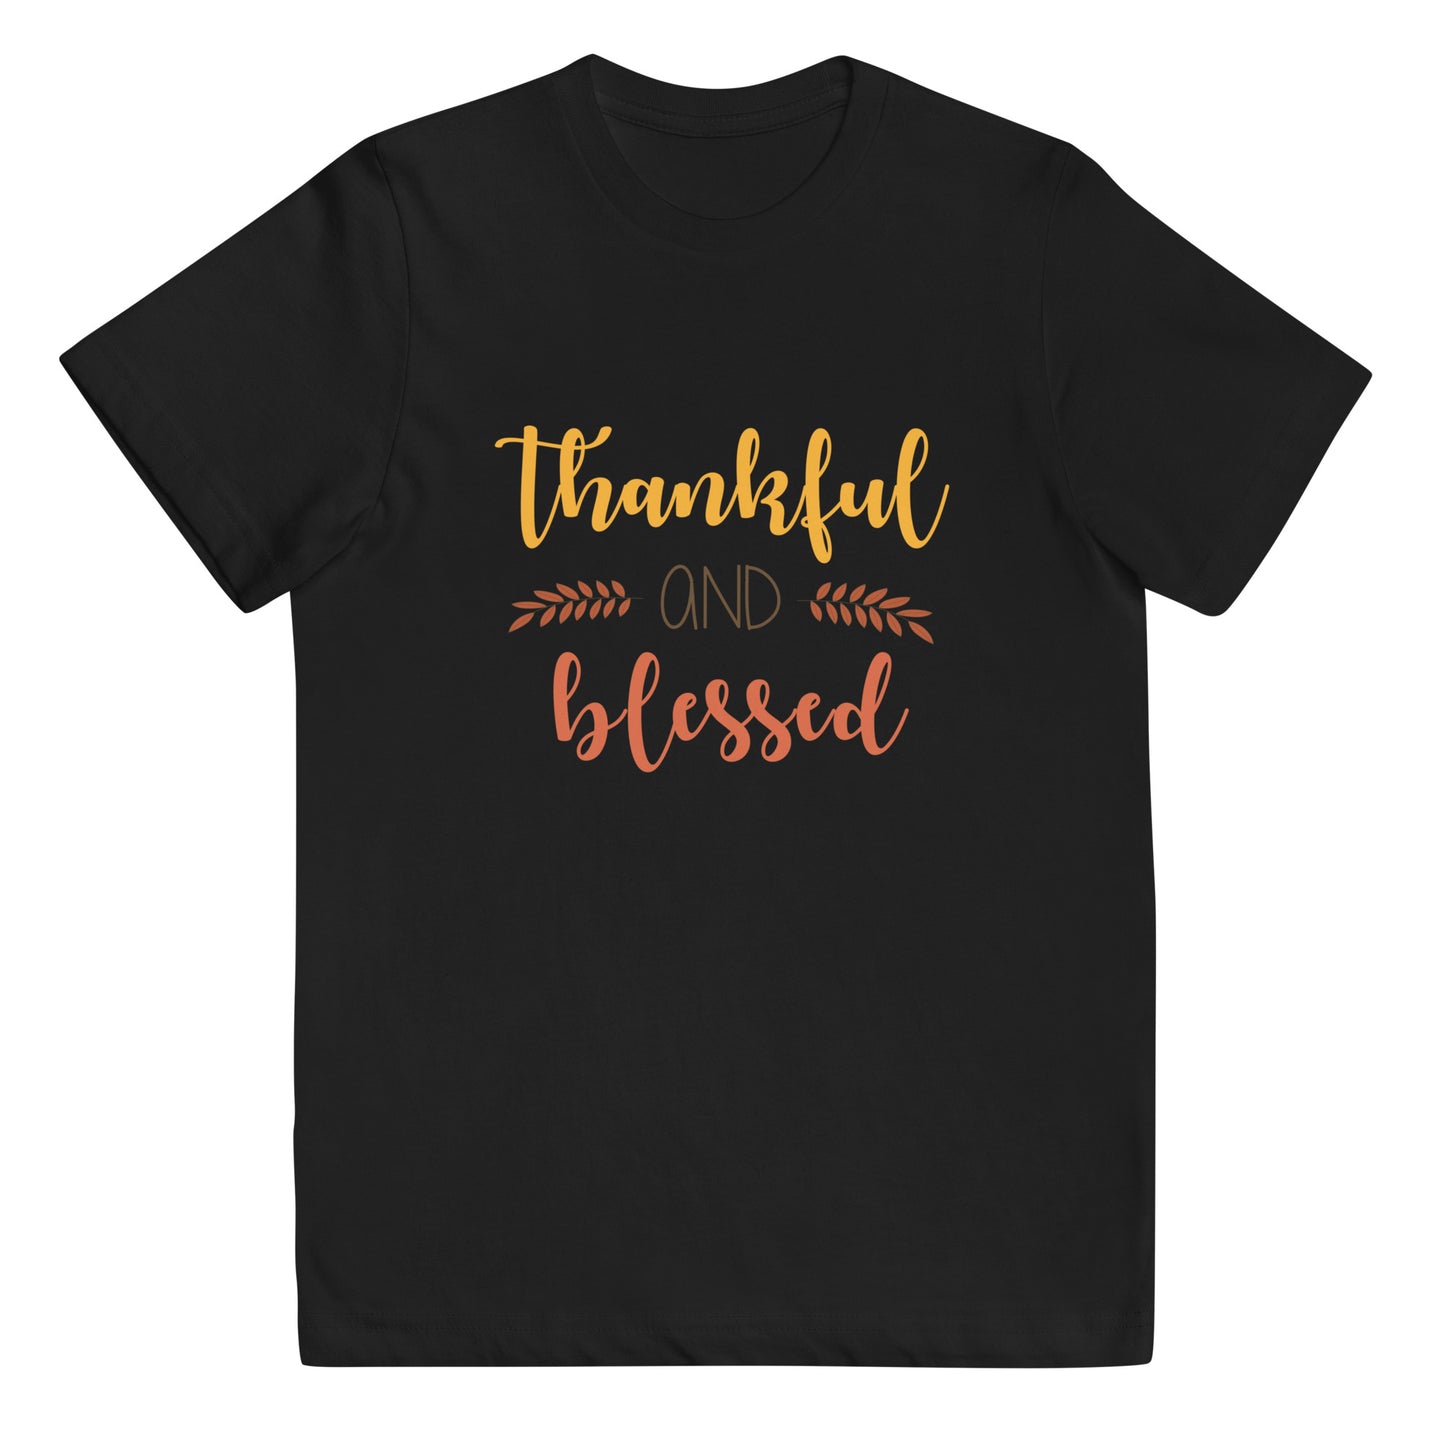 Thankful and Blessed Youth jersey t-shirt